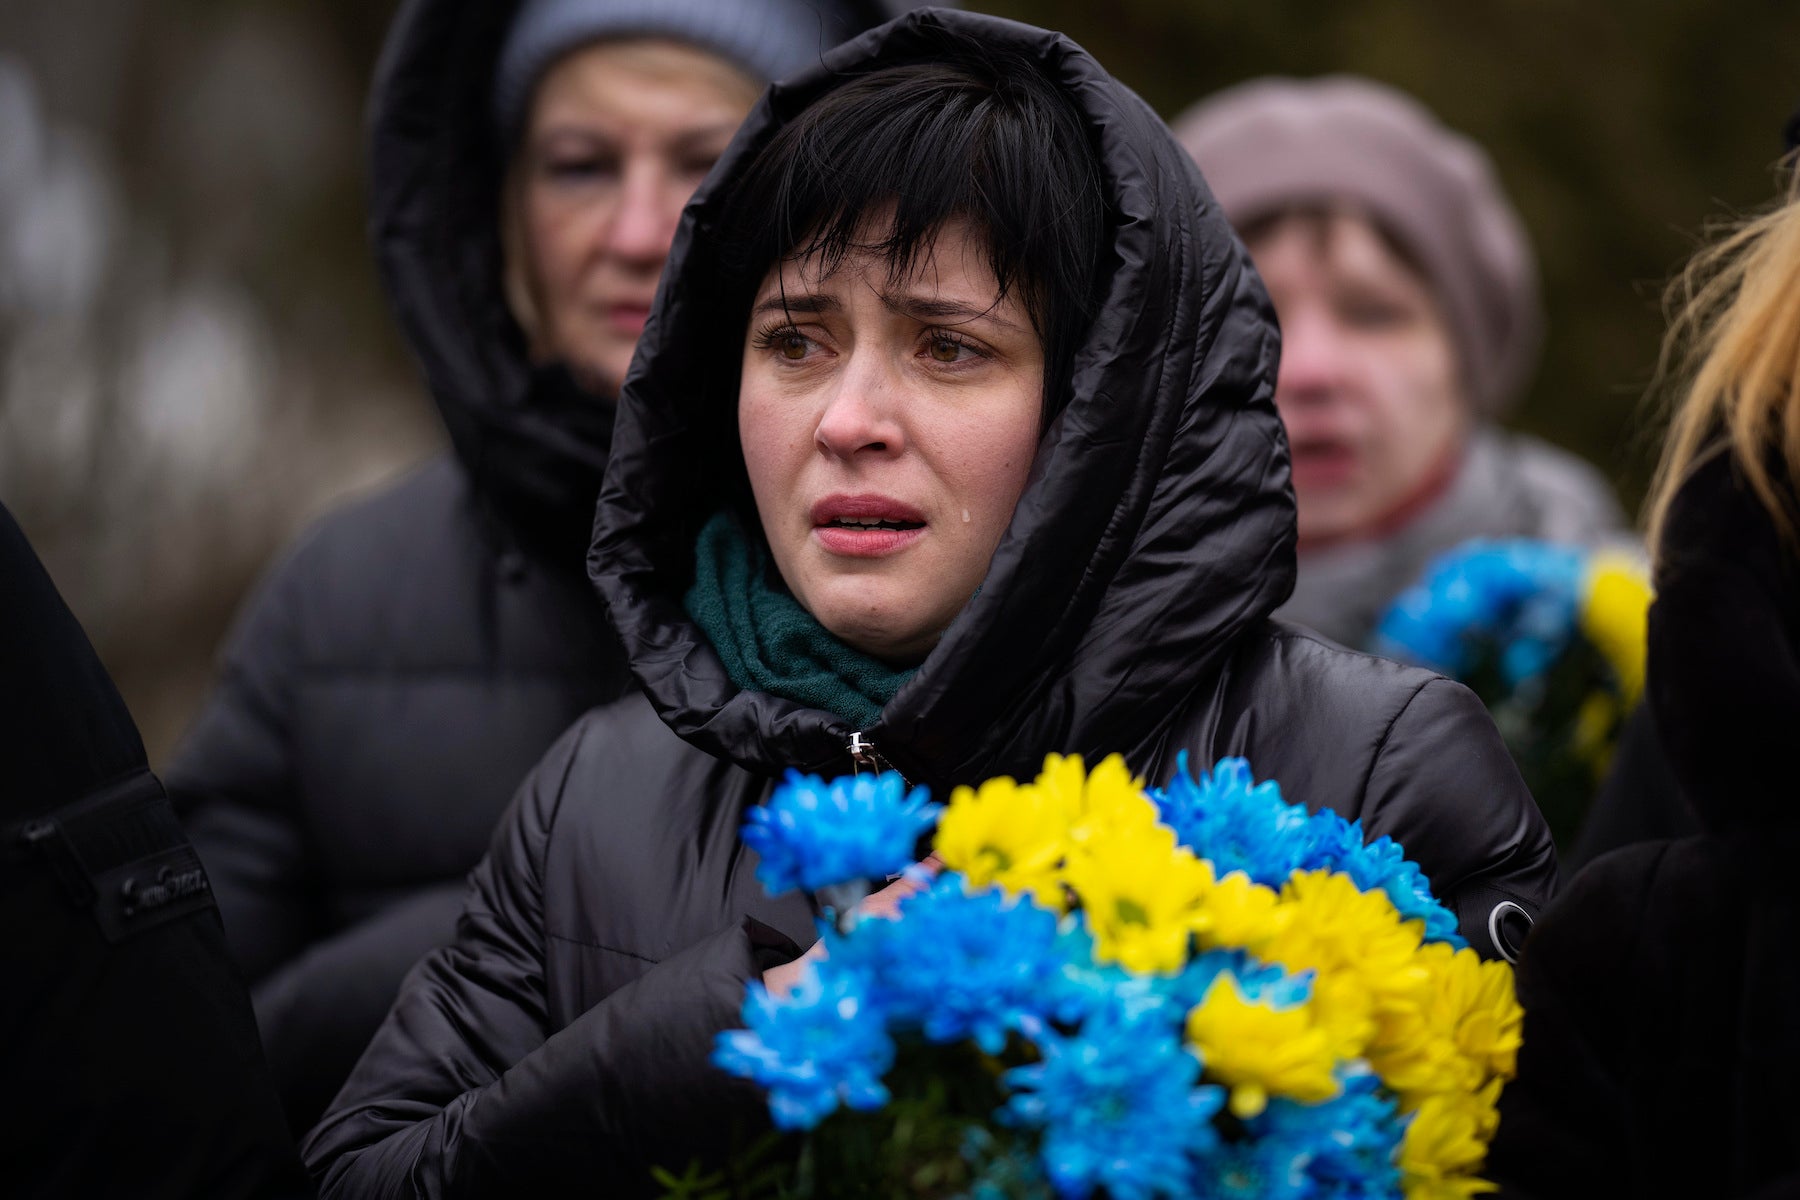 The War In Ukraine Has Brought A Welcome Surprise: Deeper Respect